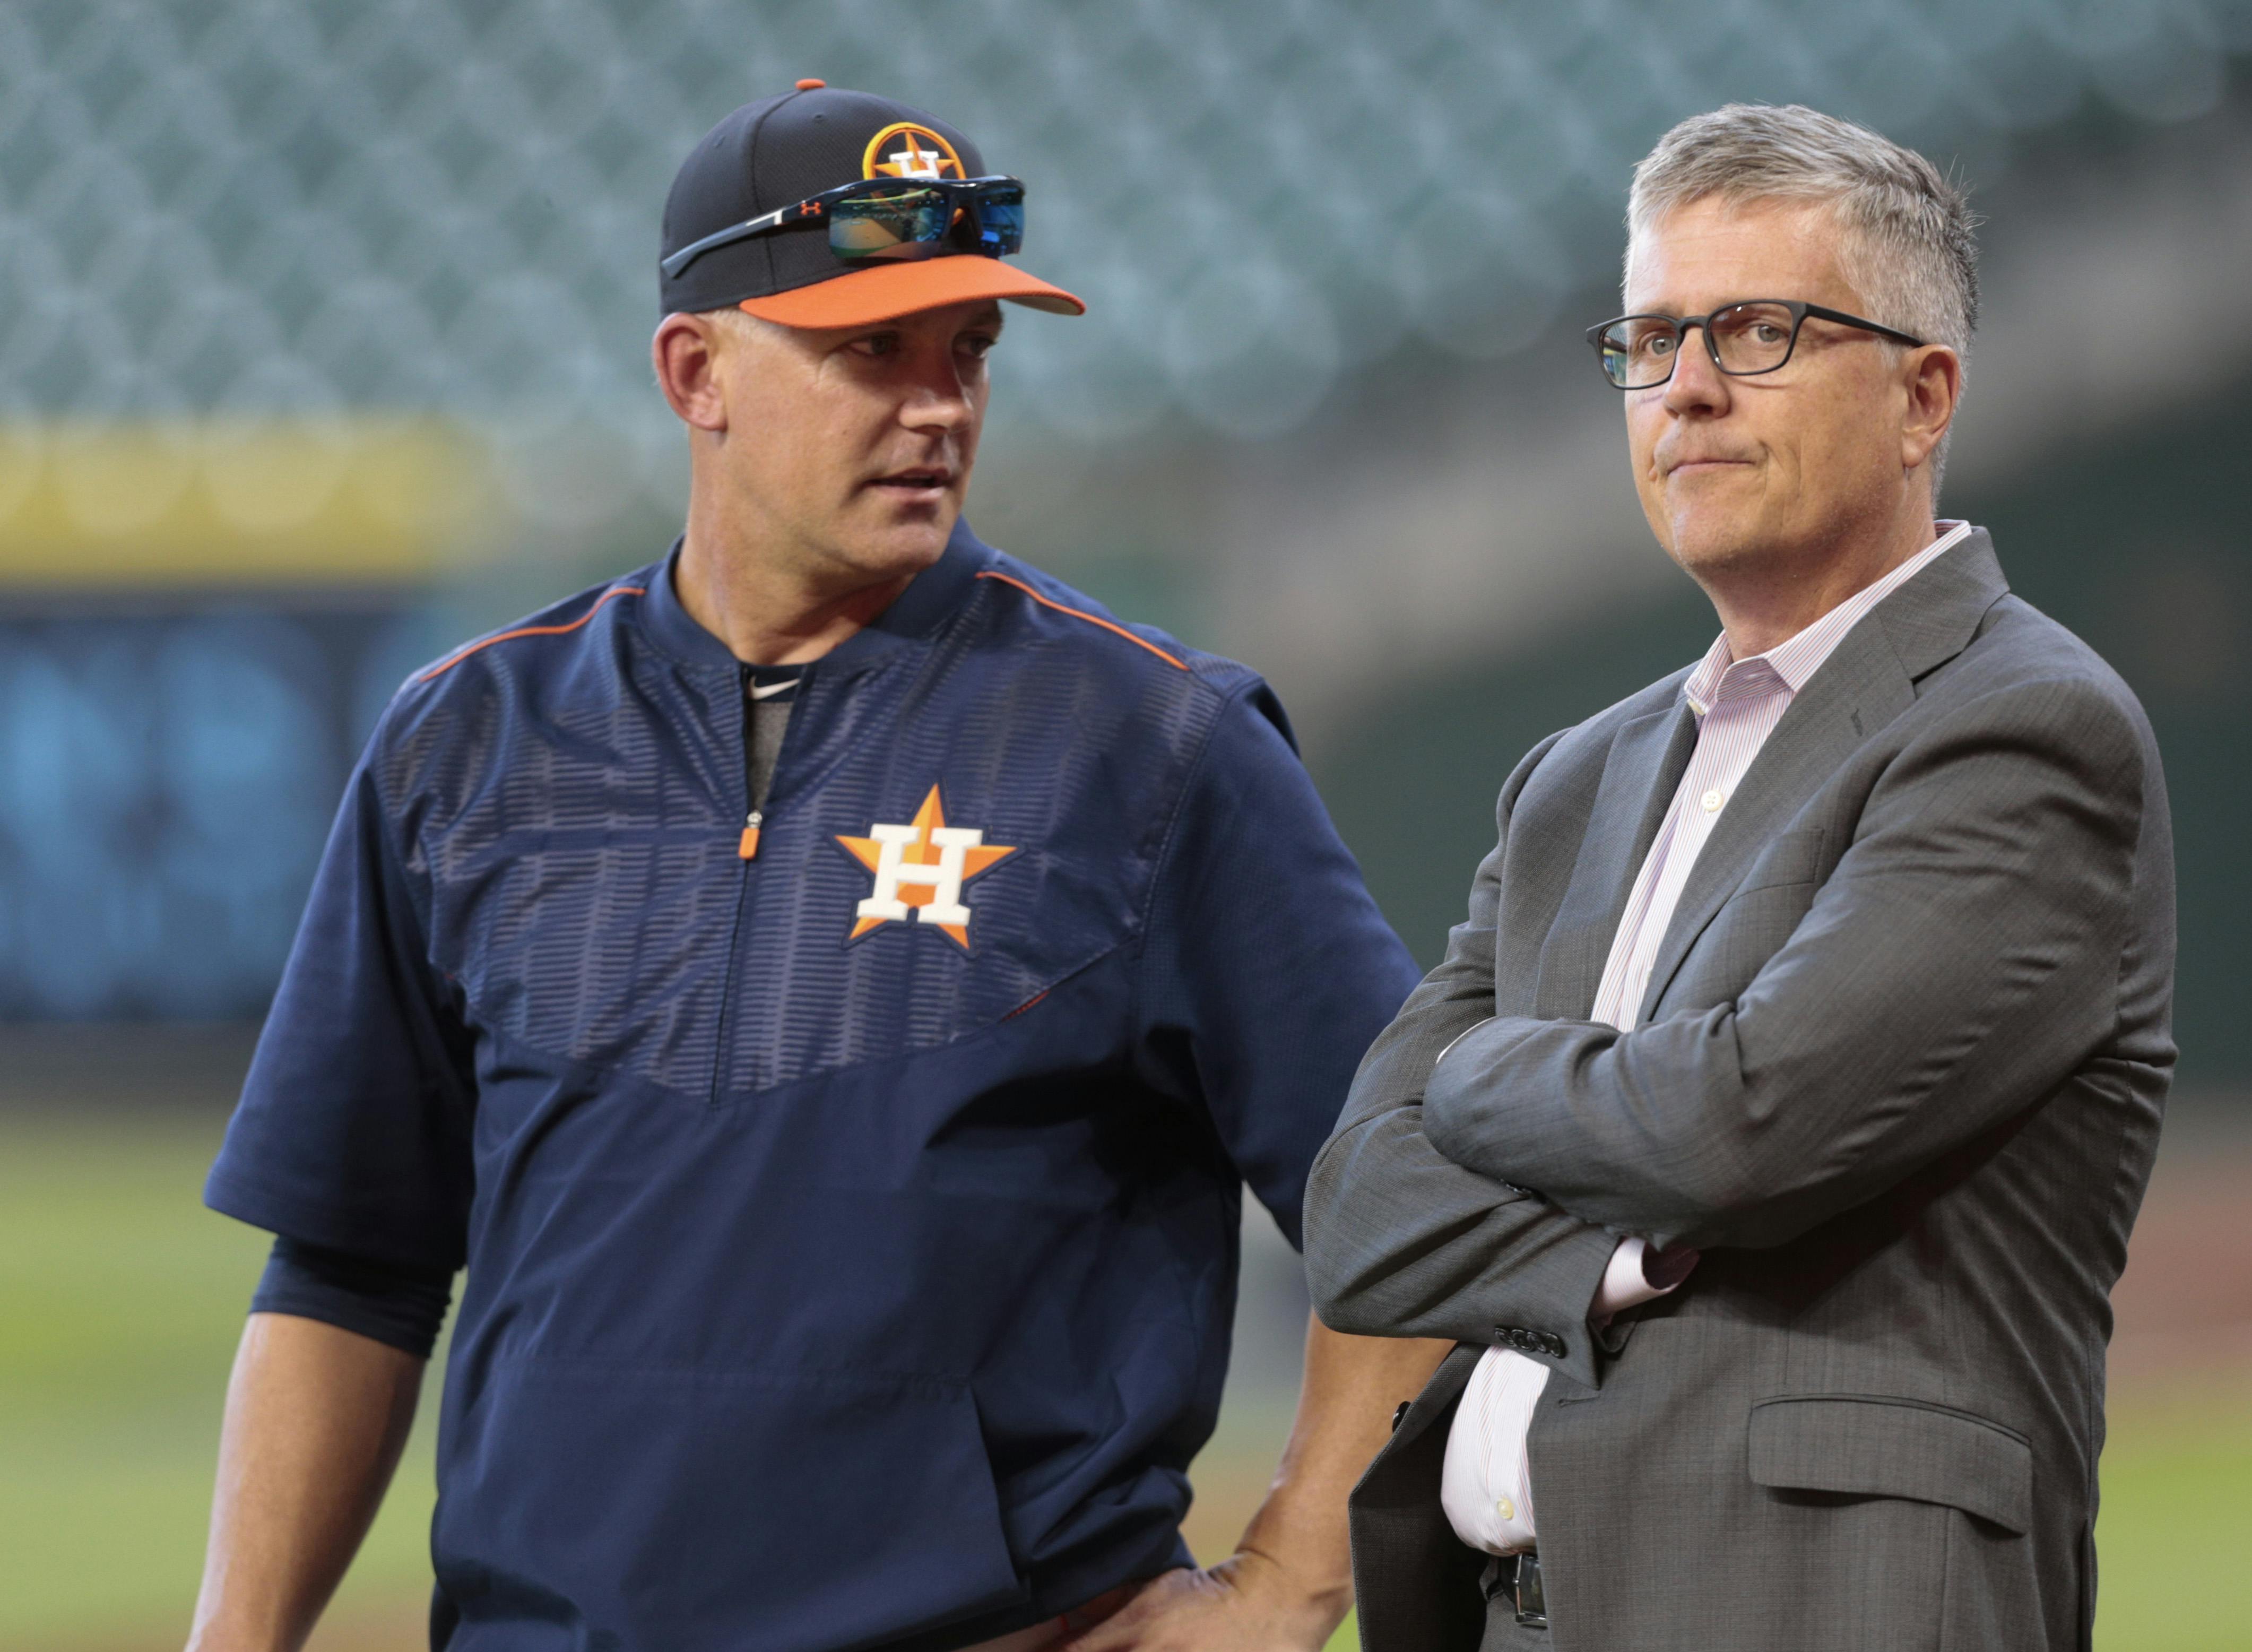 In Houston, #RallyNuns may be Astros' secret weapon in World